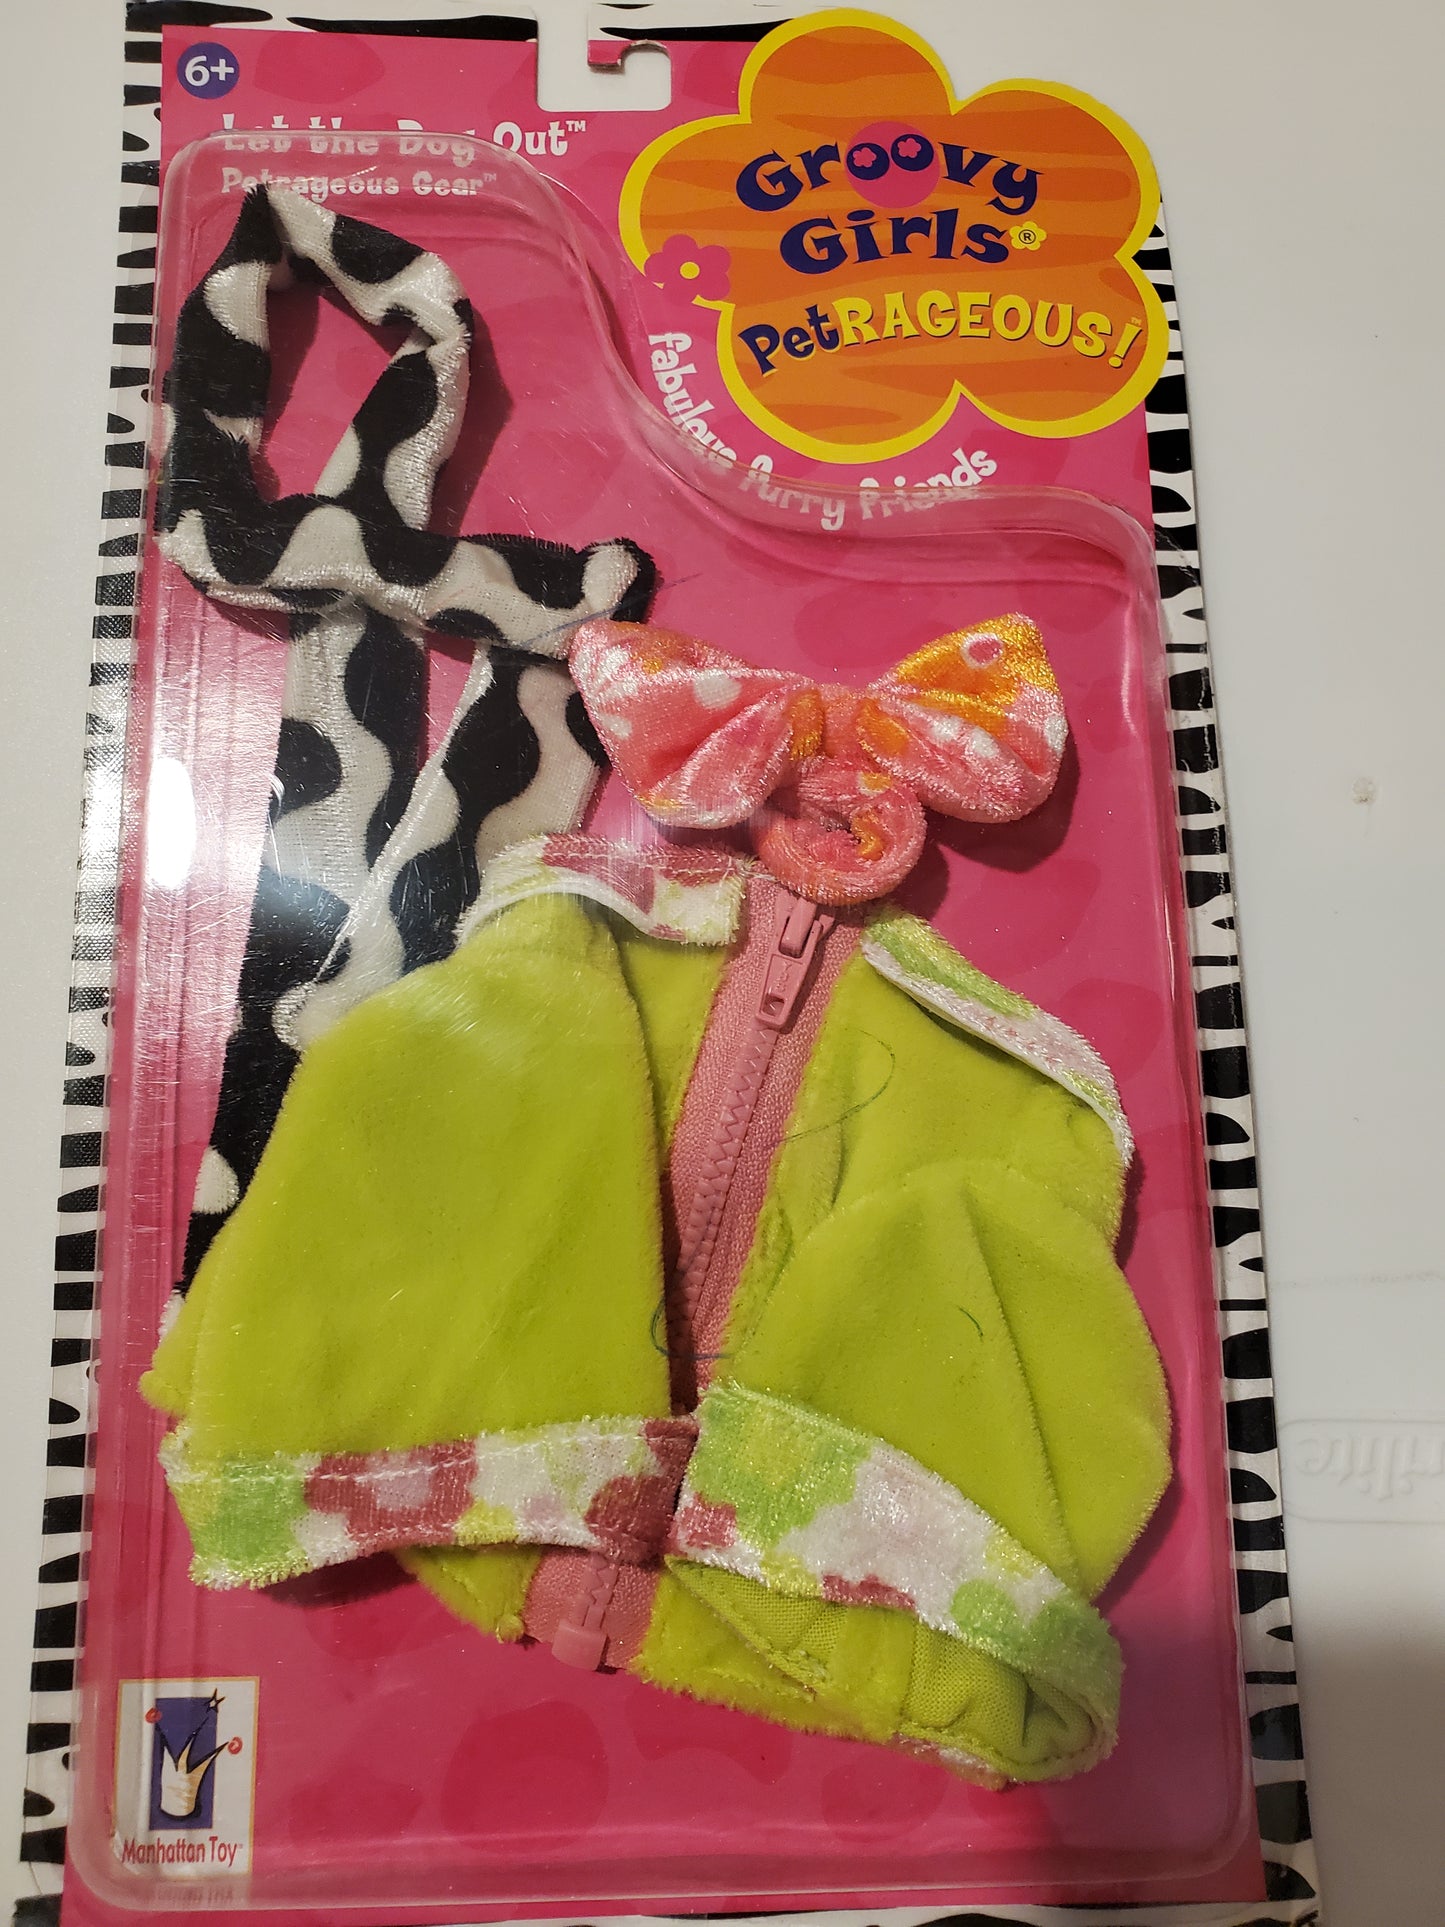 Petrageous -Let the Dog Out -  Fashion Set  - Groovy Girls 2005 - Mint in Box